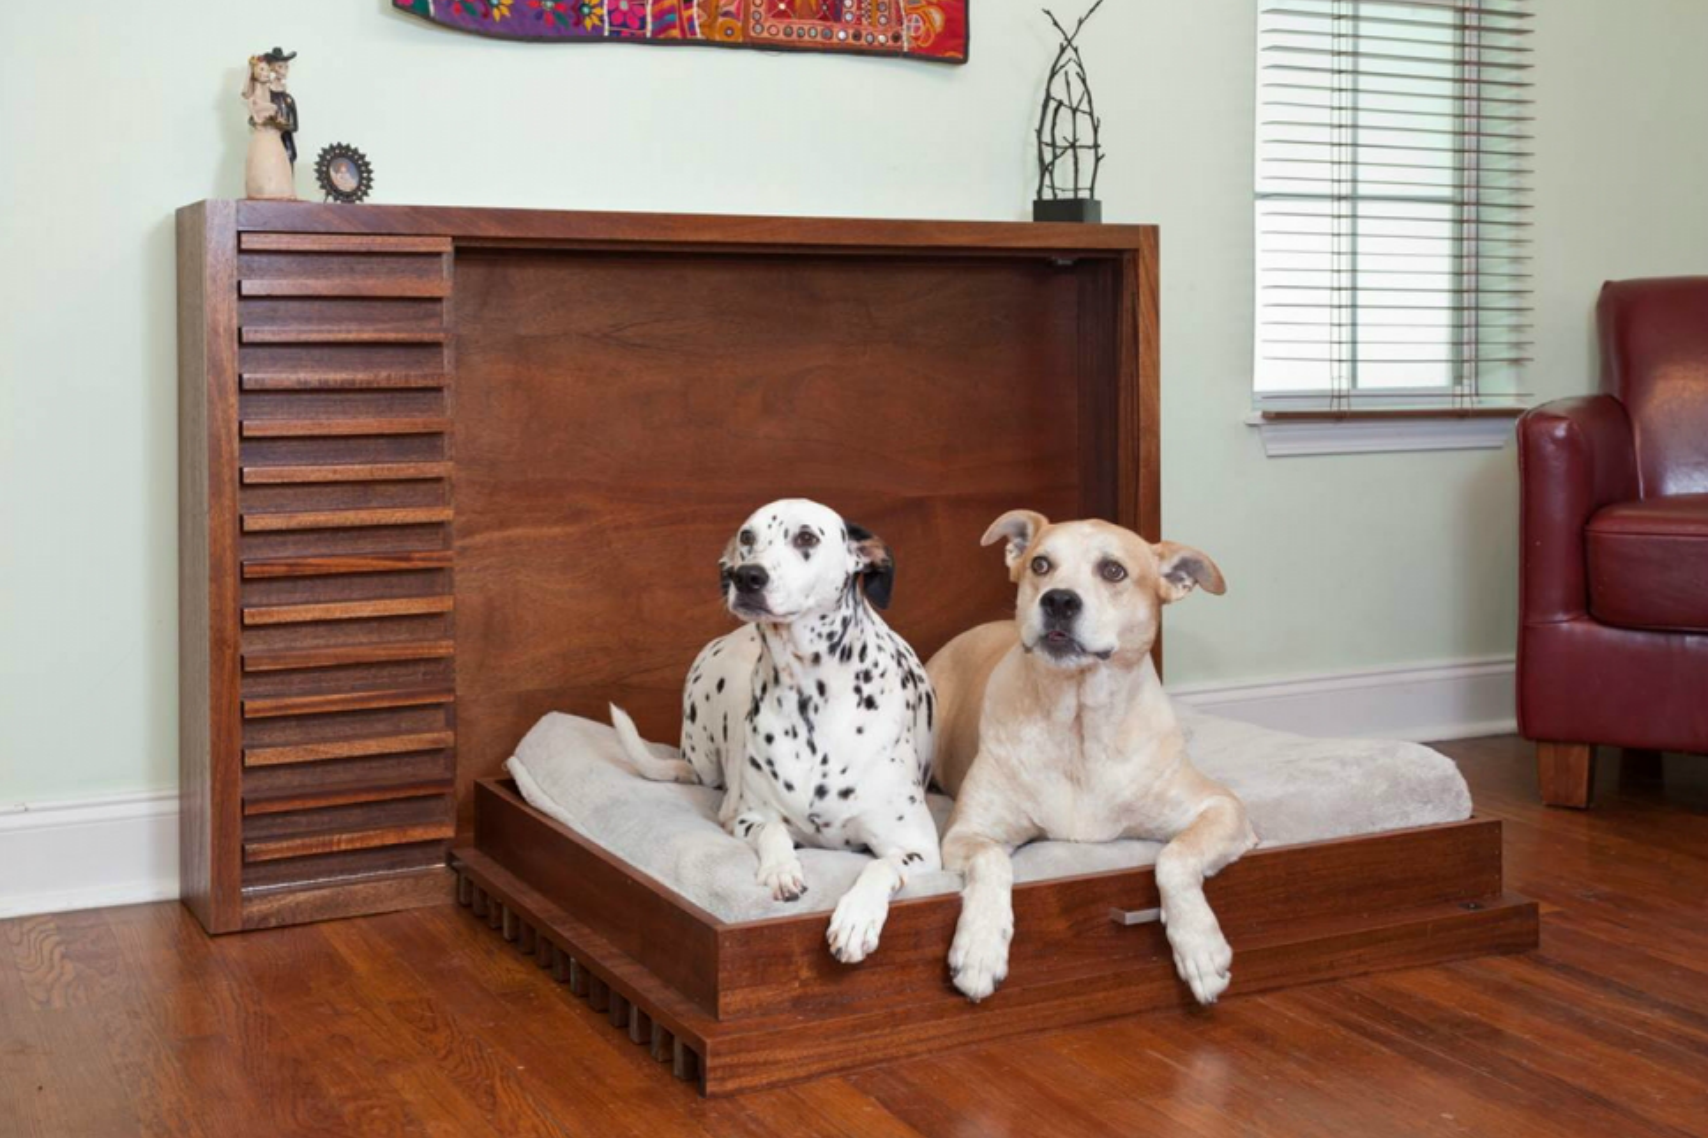 Murphy bed +80 Adorable Dog Bed Designs That Will Surprise You - 23